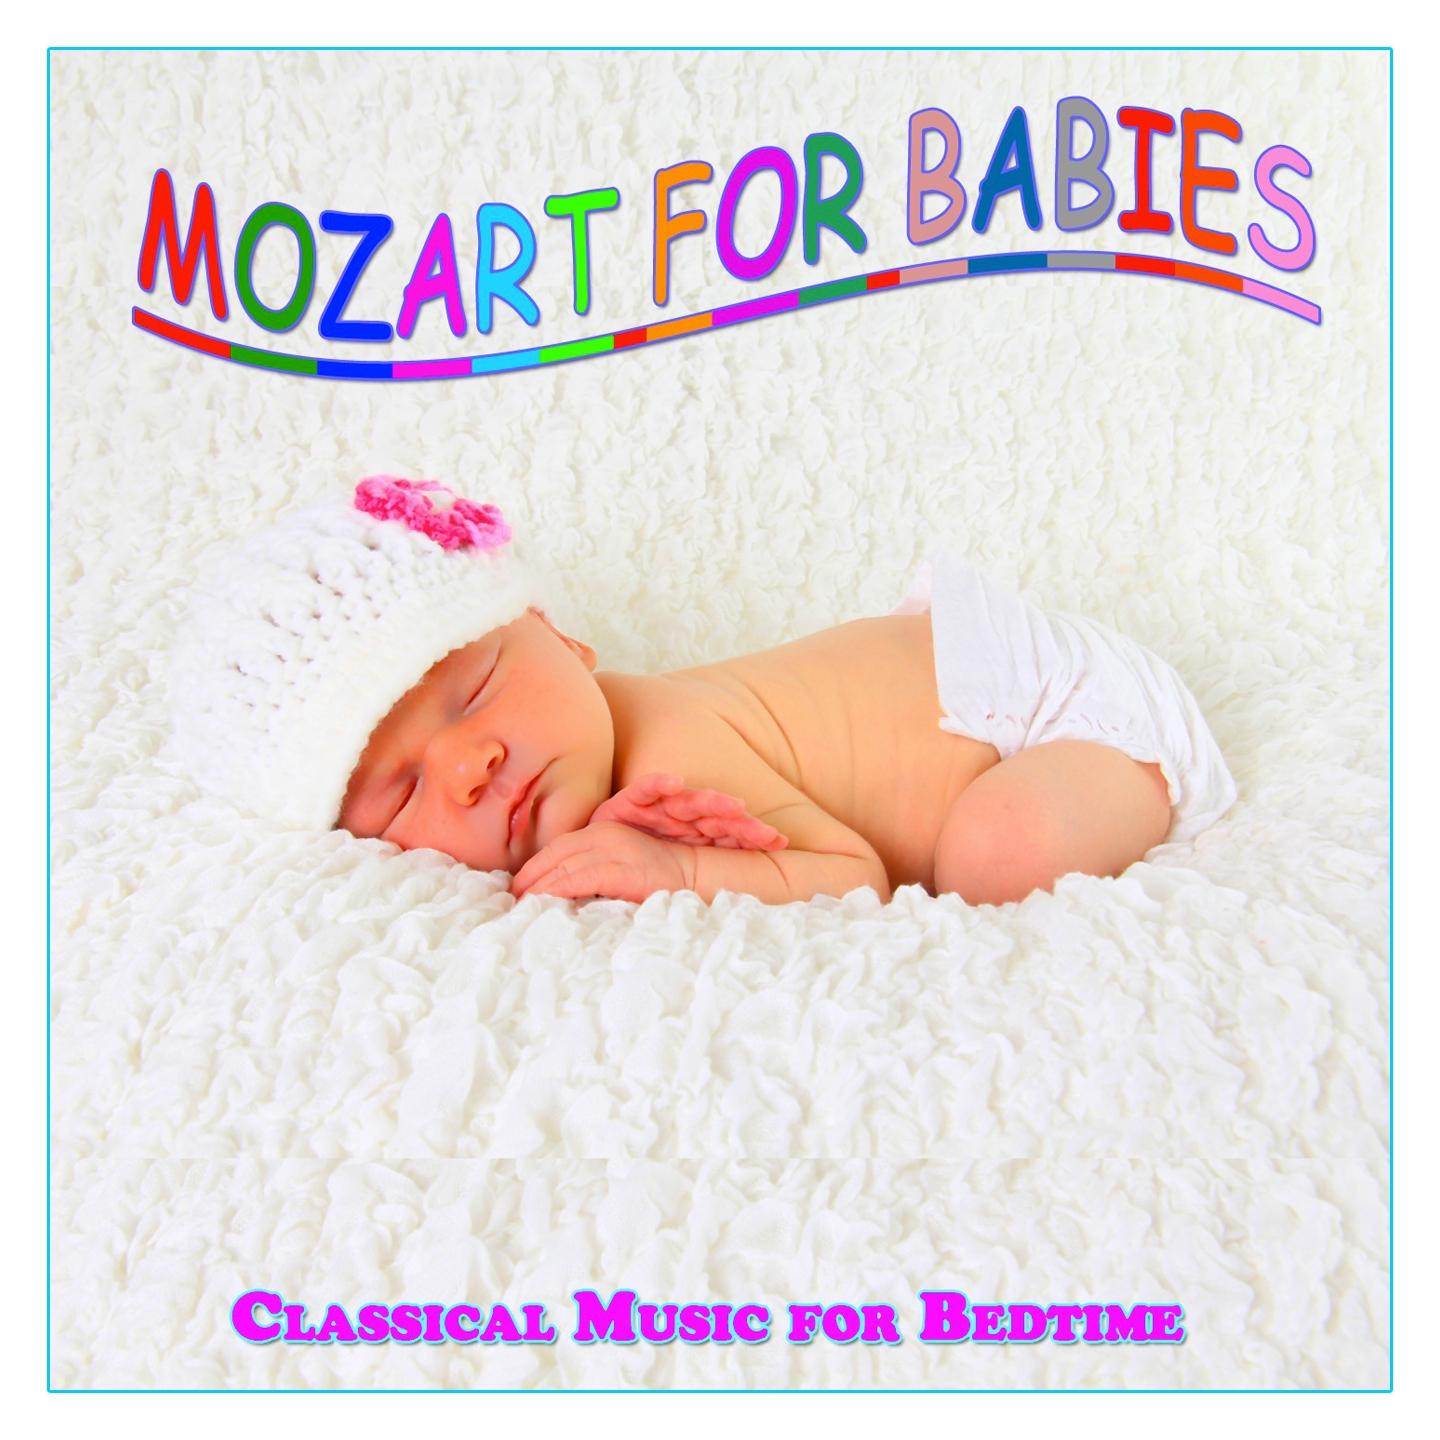 Mozart for Babies, Vol. 2 (Classical Music for Bedtime)